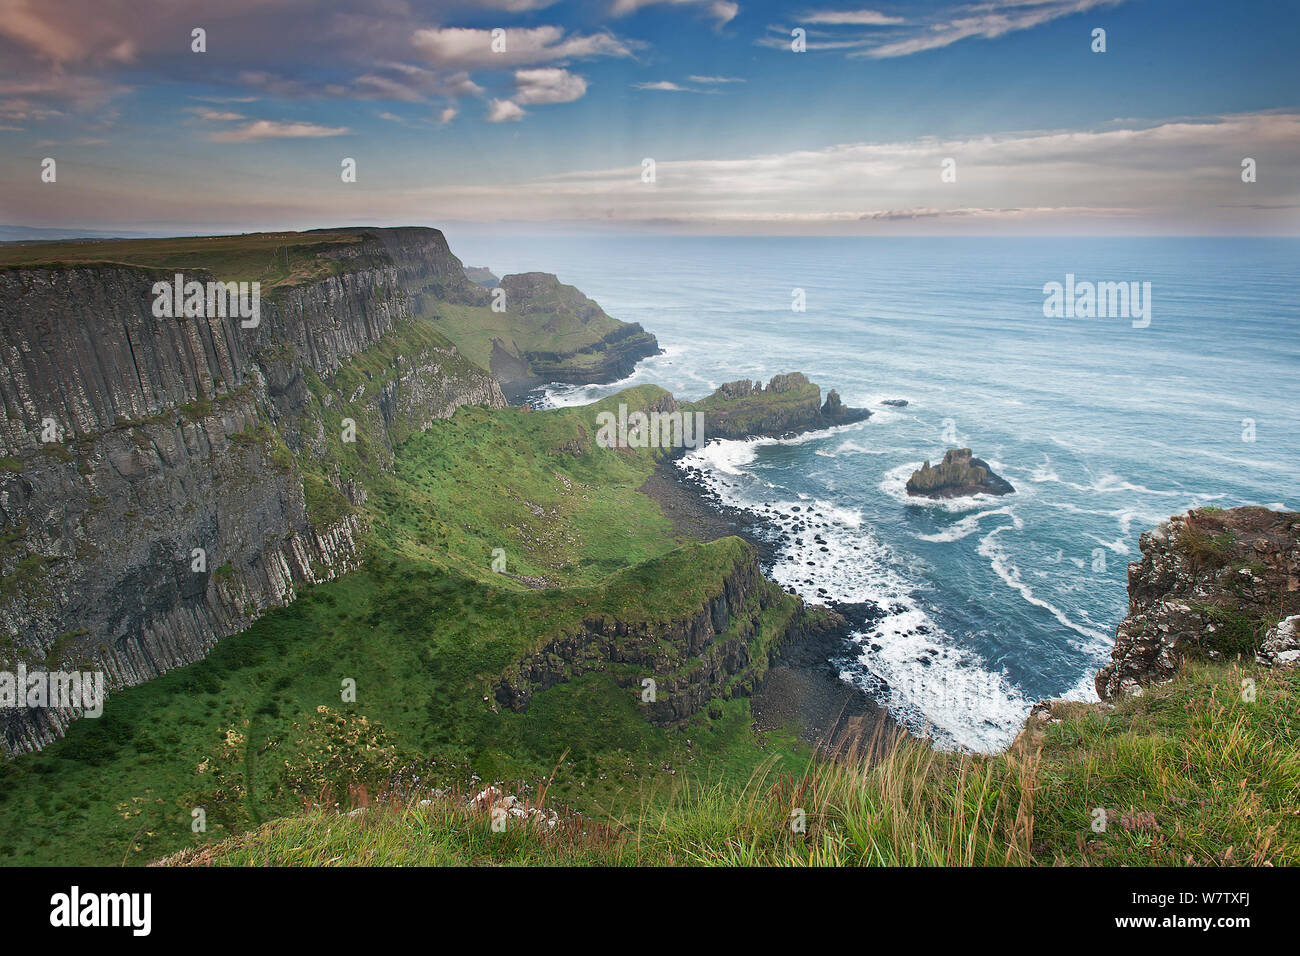 Landscape and cliffs on the Causeway coast, Antrim county, Northern Ireland, UK, September 2013. Stock Photo